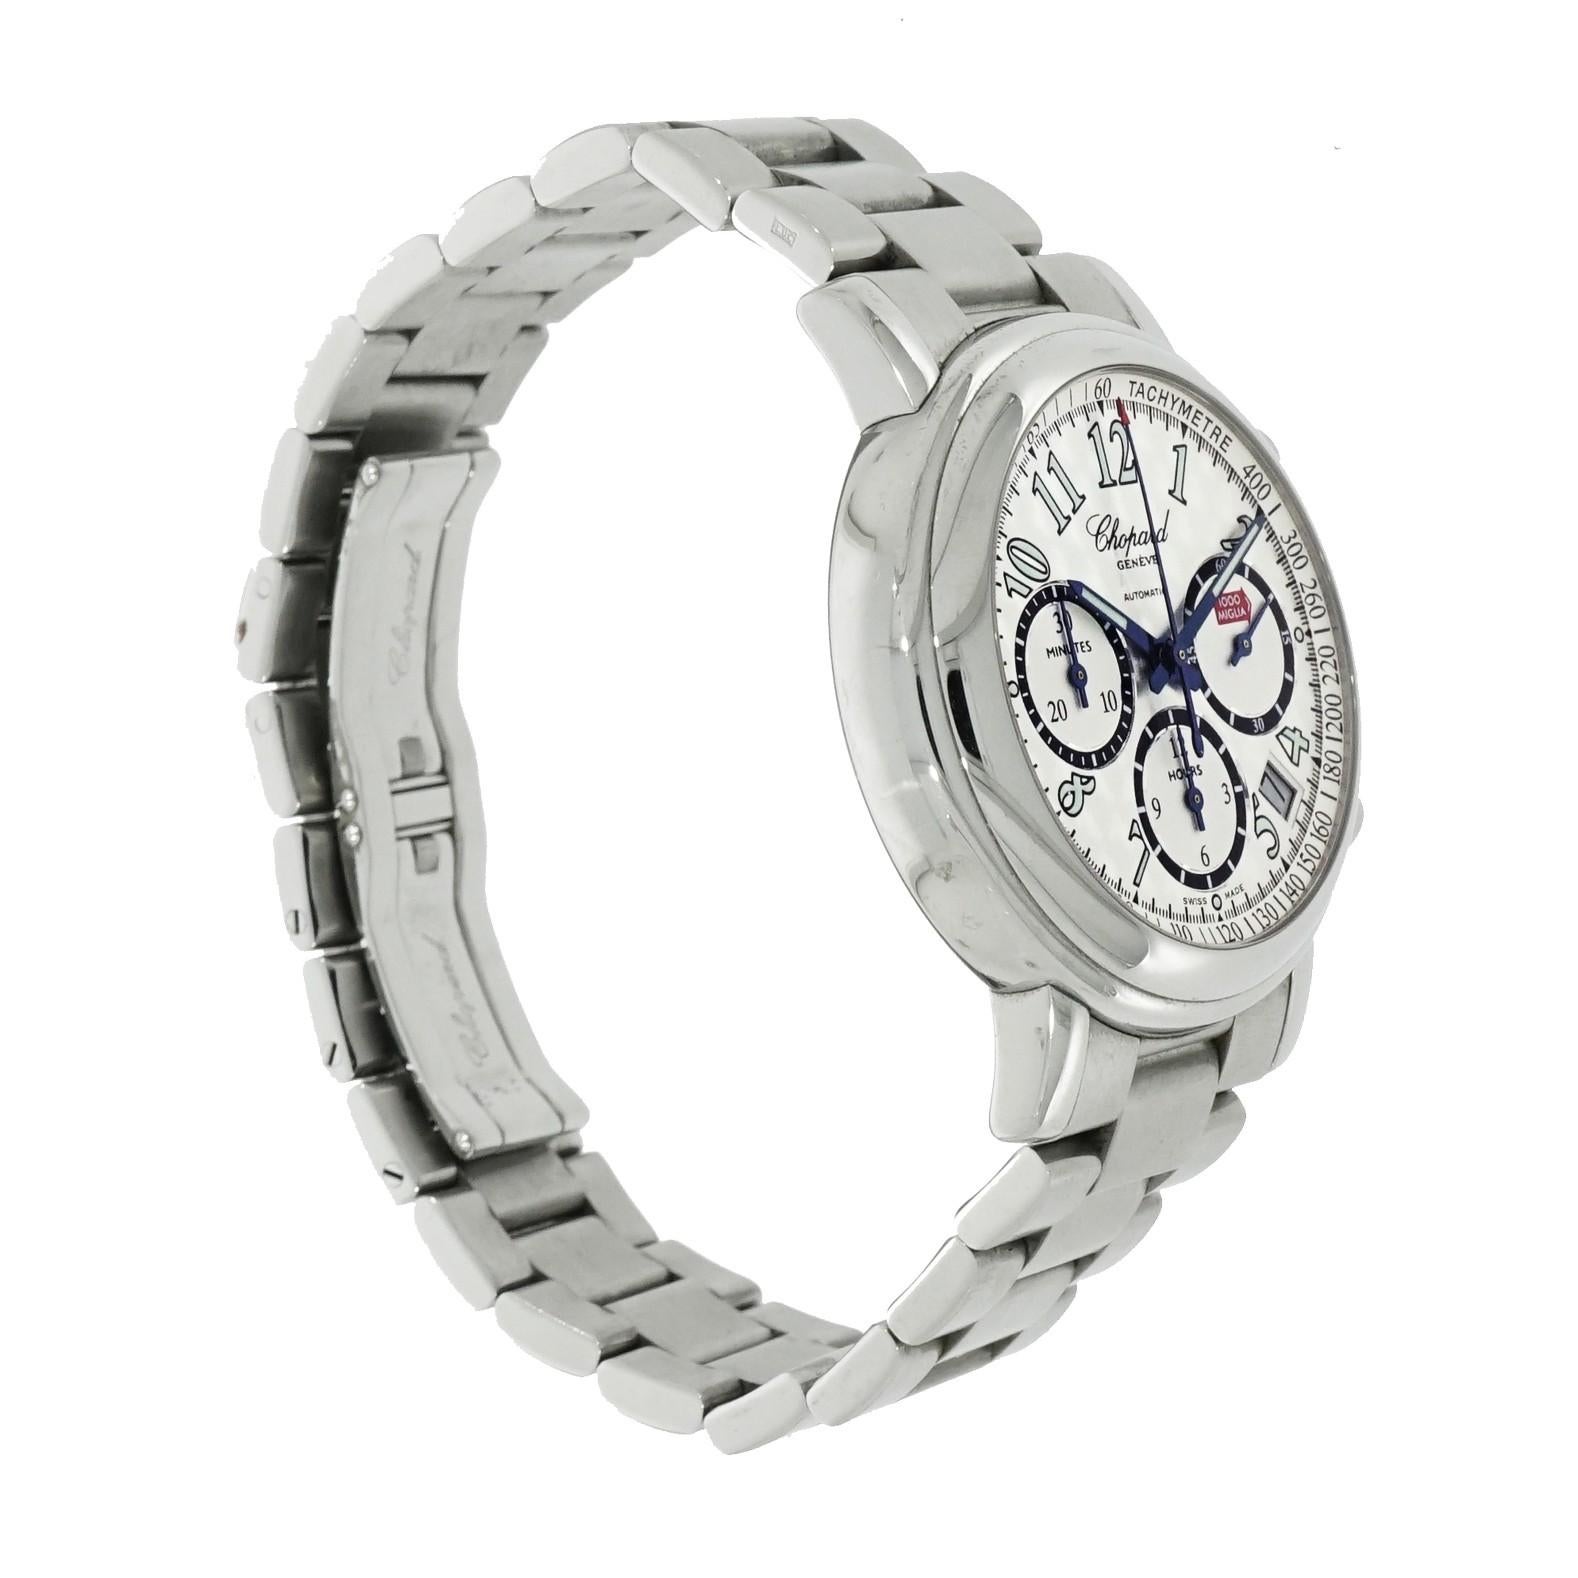 Modern Chopard Mille Miglia Chronograph in Stainless Steel